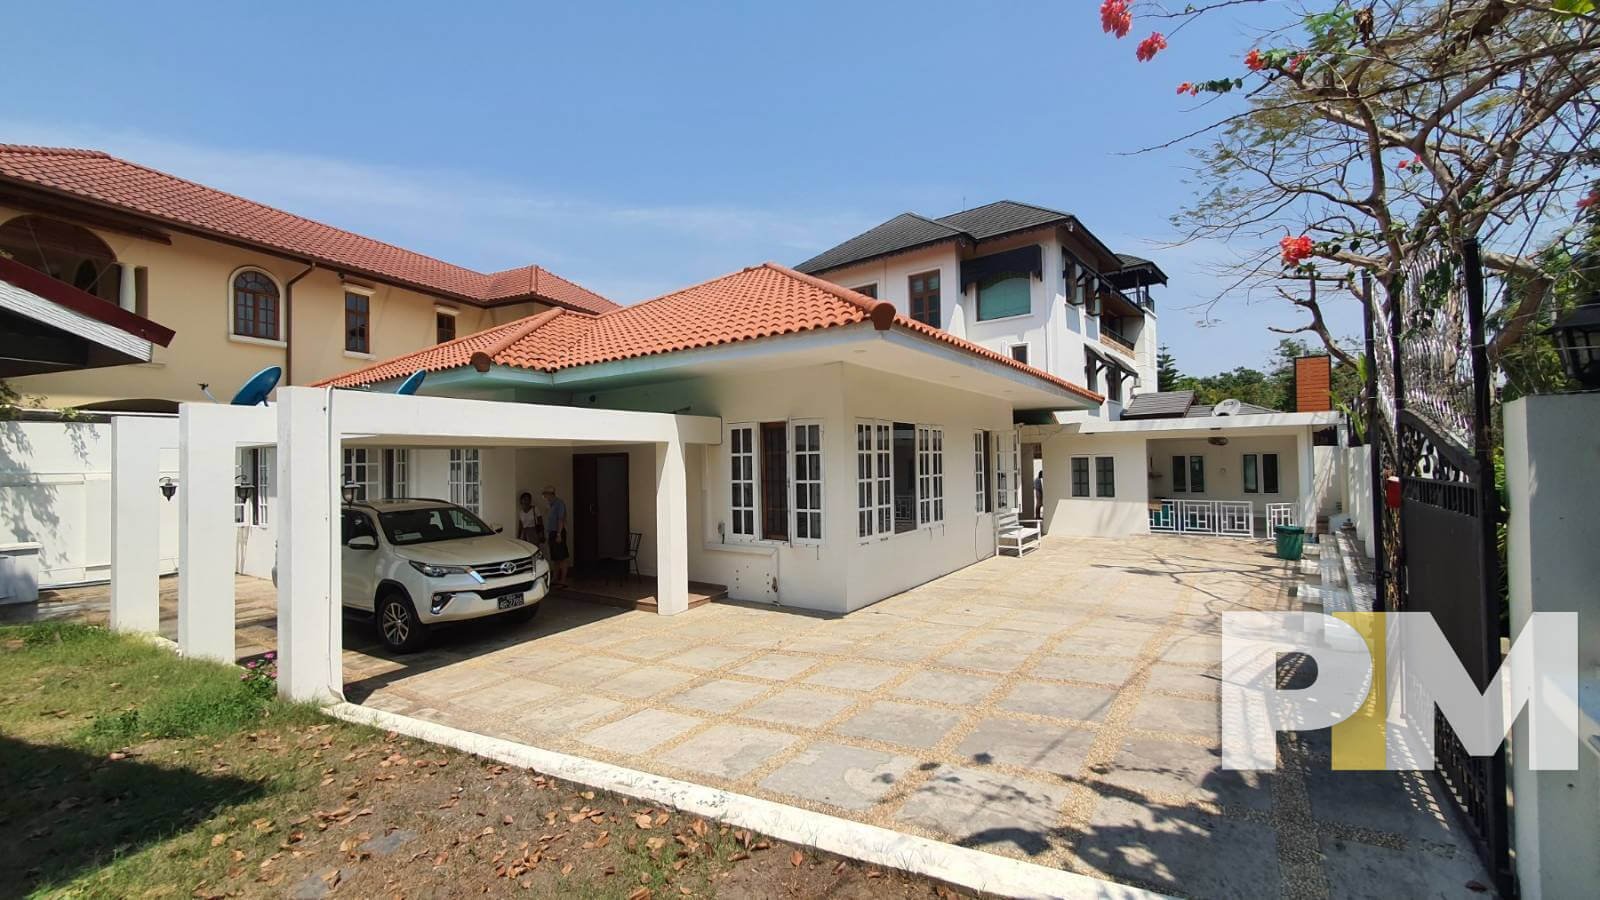 house with car parking - Real Estate in Yangon